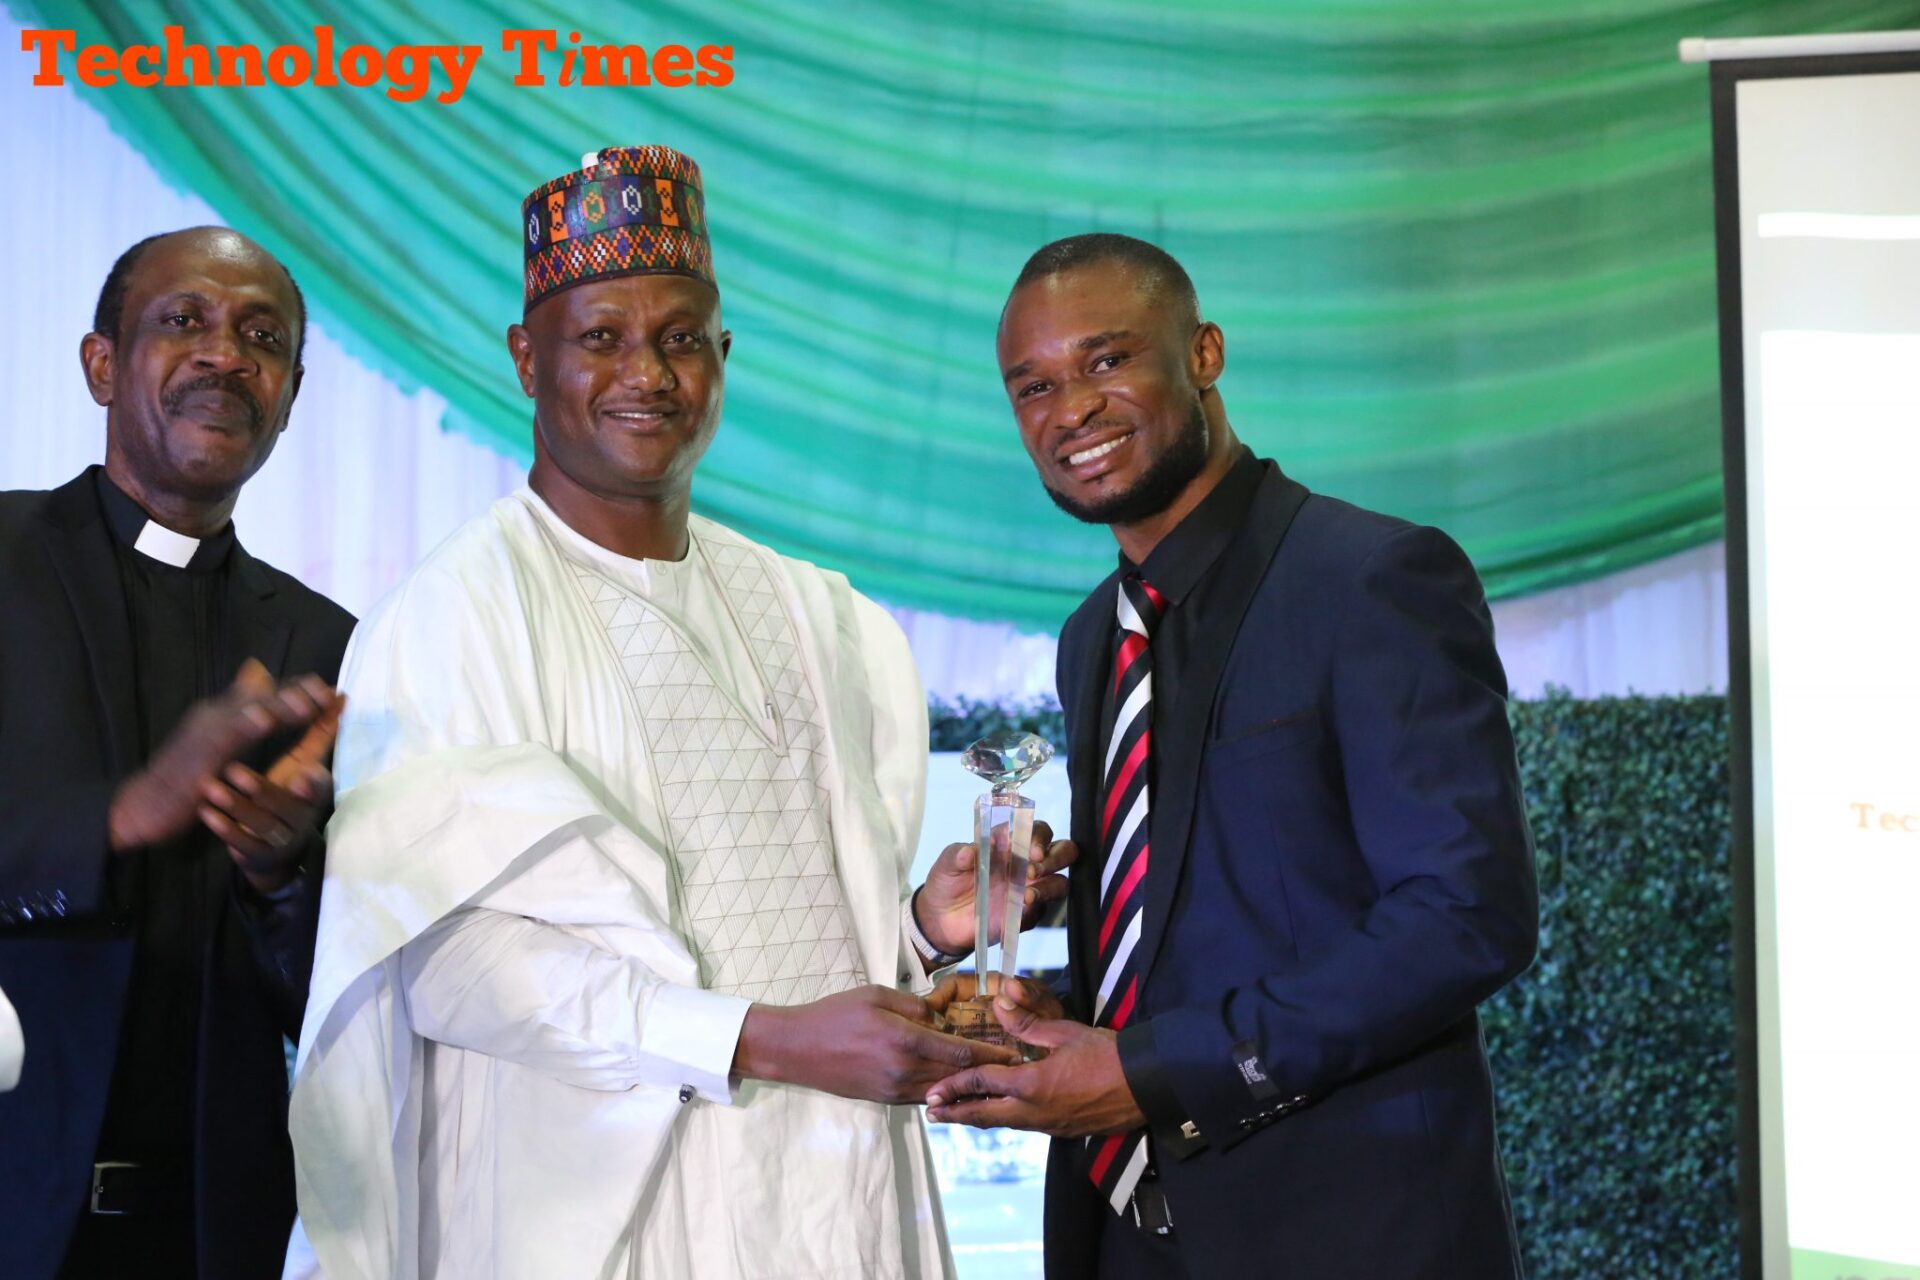 .ng Awards 2018: Technology Times wins Presidential laurel